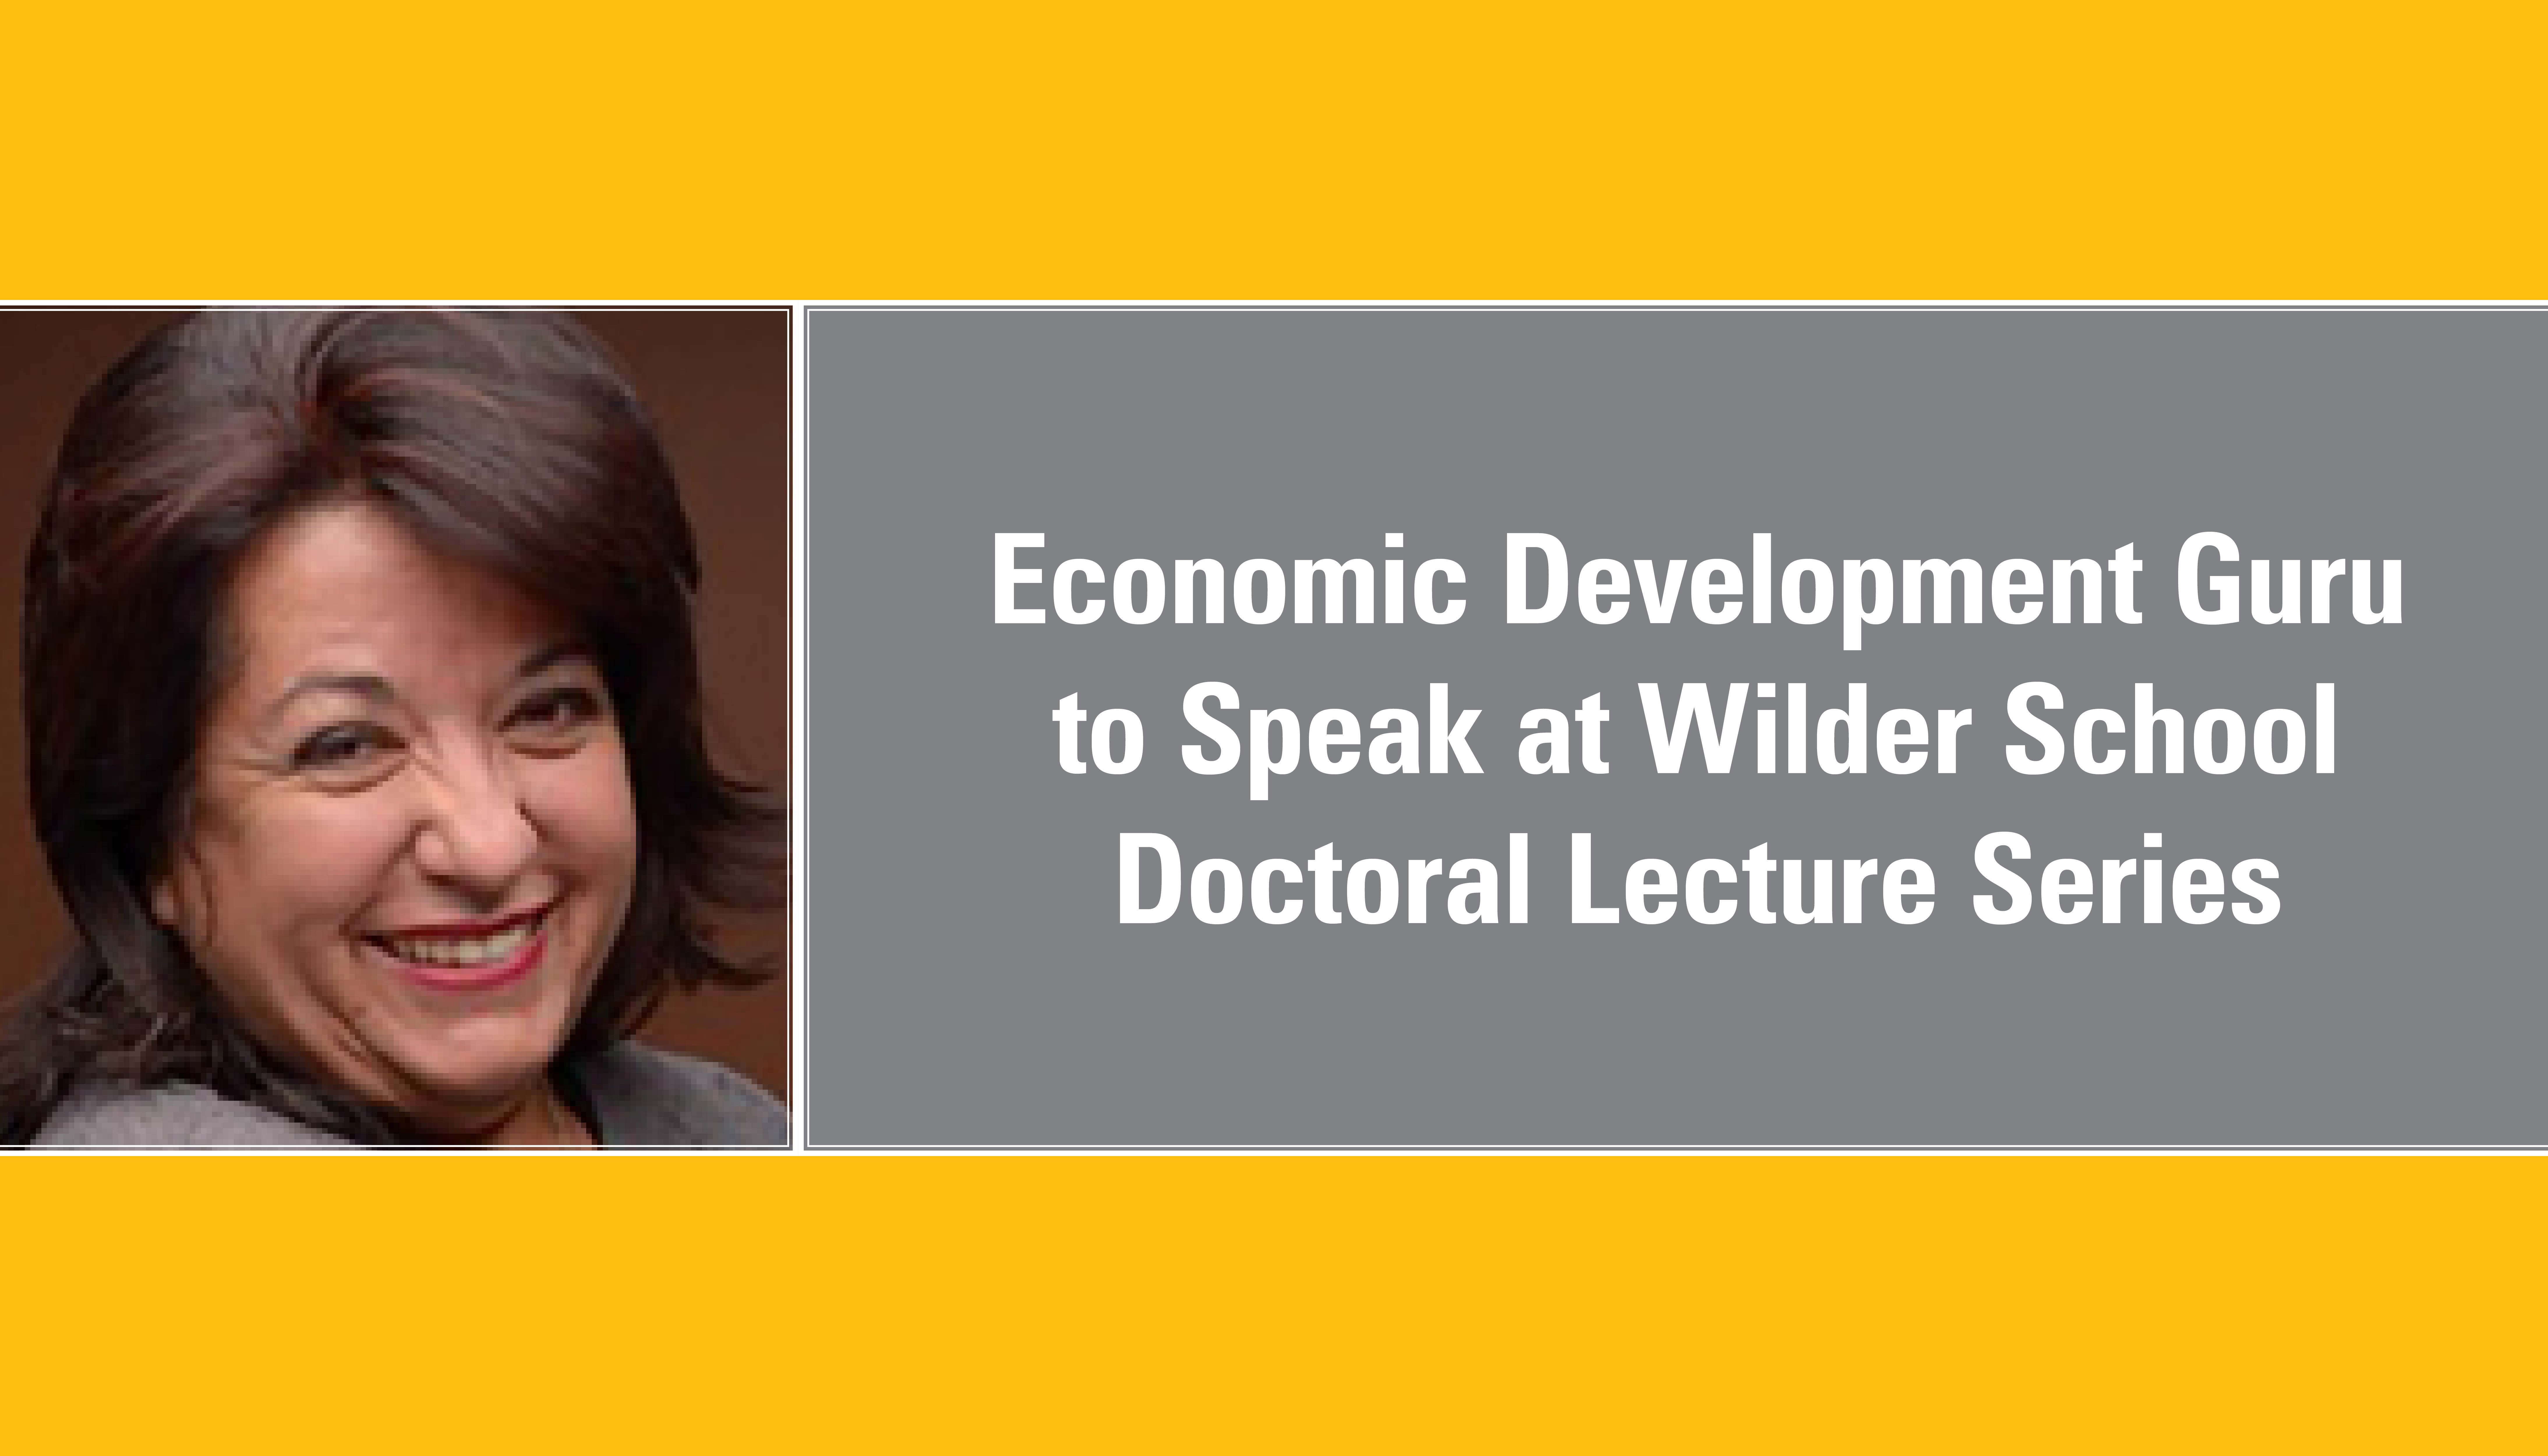 Teresa Cordova, director of the Great Cities Institute (GCI) at the University of Illinois at Chicago, will give a talk at the Wilder School Doctoral Lecture Series on Monday, March 18 at the Raleigh Building from 1-2:30 p.m.